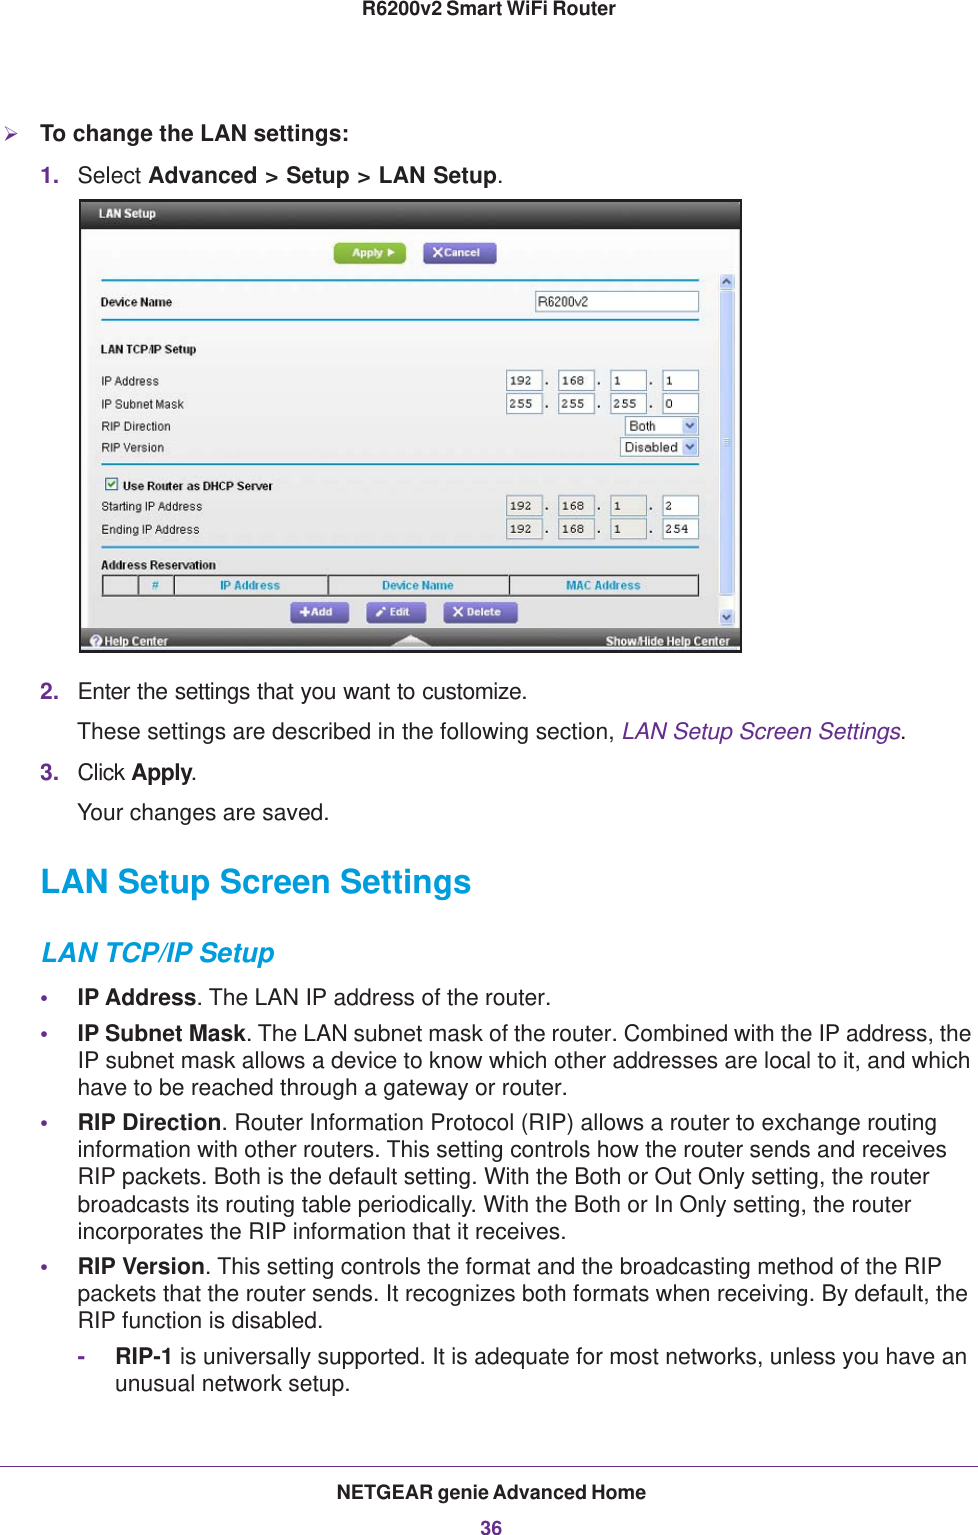 NETGEAR genie Advanced Home36R6200v2 Smart WiFi Router To change the LAN settings:1. Select Advanced &gt; Setup &gt; LAN Setup.2. Enter the settings that you want to customize. These settings are described in the following section, LAN Setup Screen Settings.3. Click Apply.Your changes are saved.LAN Setup Screen SettingsLAN TCP/IP Setup•IP Address. The LAN IP address of the router.•IP Subnet Mask. The LAN subnet mask of the router. Combined with the IP address, the IP subnet mask allows a device to know which other addresses are local to it, and which have to be reached through a gateway or router.•RIP Direction. Router Information Protocol (RIP) allows a router to exchange routing information with other routers. This setting controls how the router sends and receives RIP packets. Both is the default setting. With the Both or Out Only setting, the router broadcasts its routing table periodically. With the Both or In Only setting, the router incorporates the RIP information that it receives.•RIP Version. This setting controls the format and the broadcasting method of the RIP packets that the router sends. It recognizes both formats when receiving. By default, the RIP function is disabled. -RIP-1 is universally supported. It is adequate for most networks, unless you have an unusual network setup. 